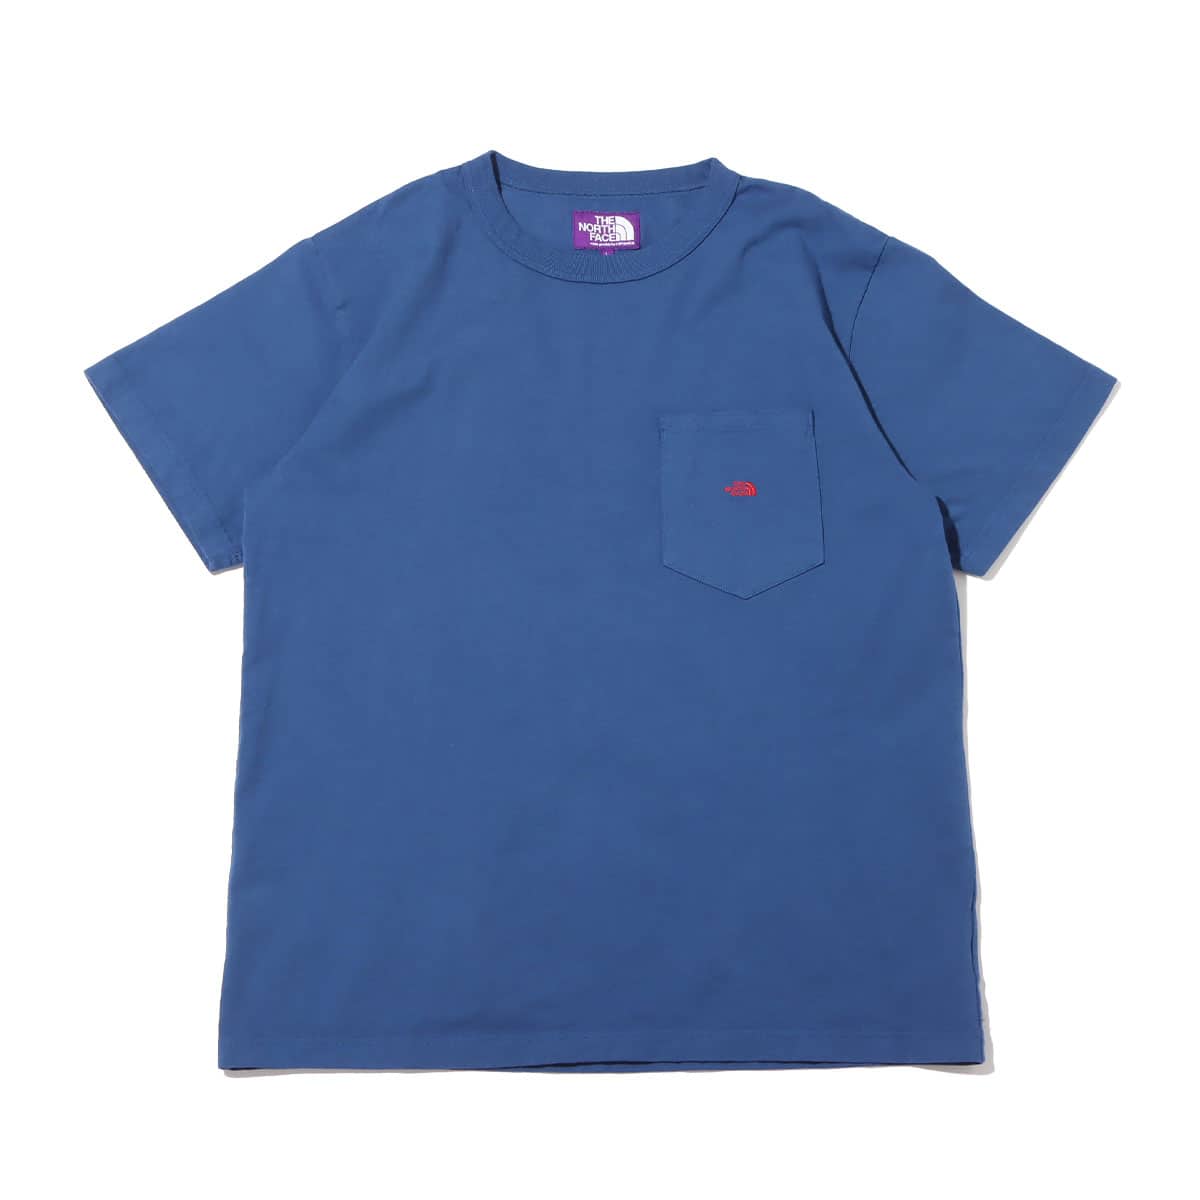 THE NORTH FACE PURPLE LABEL 7OZ H/S POCKET TEE Teal Blue × Red 22SS-I